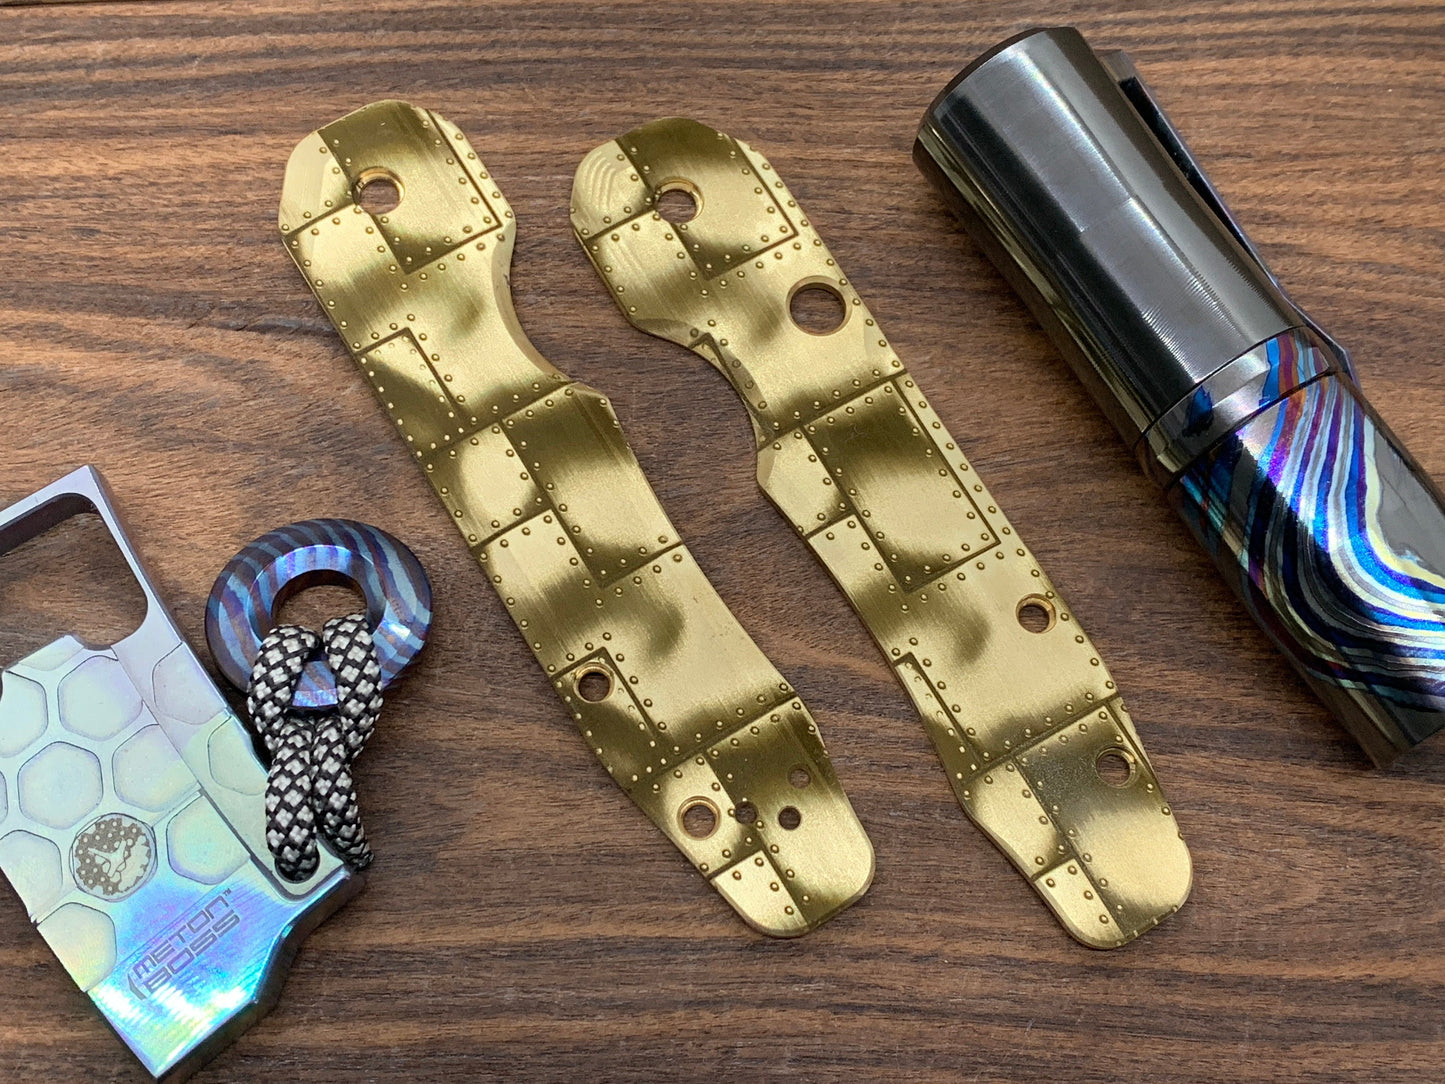 RIVETED AIRPLANE Brass Scales for Spyderco SMOCK